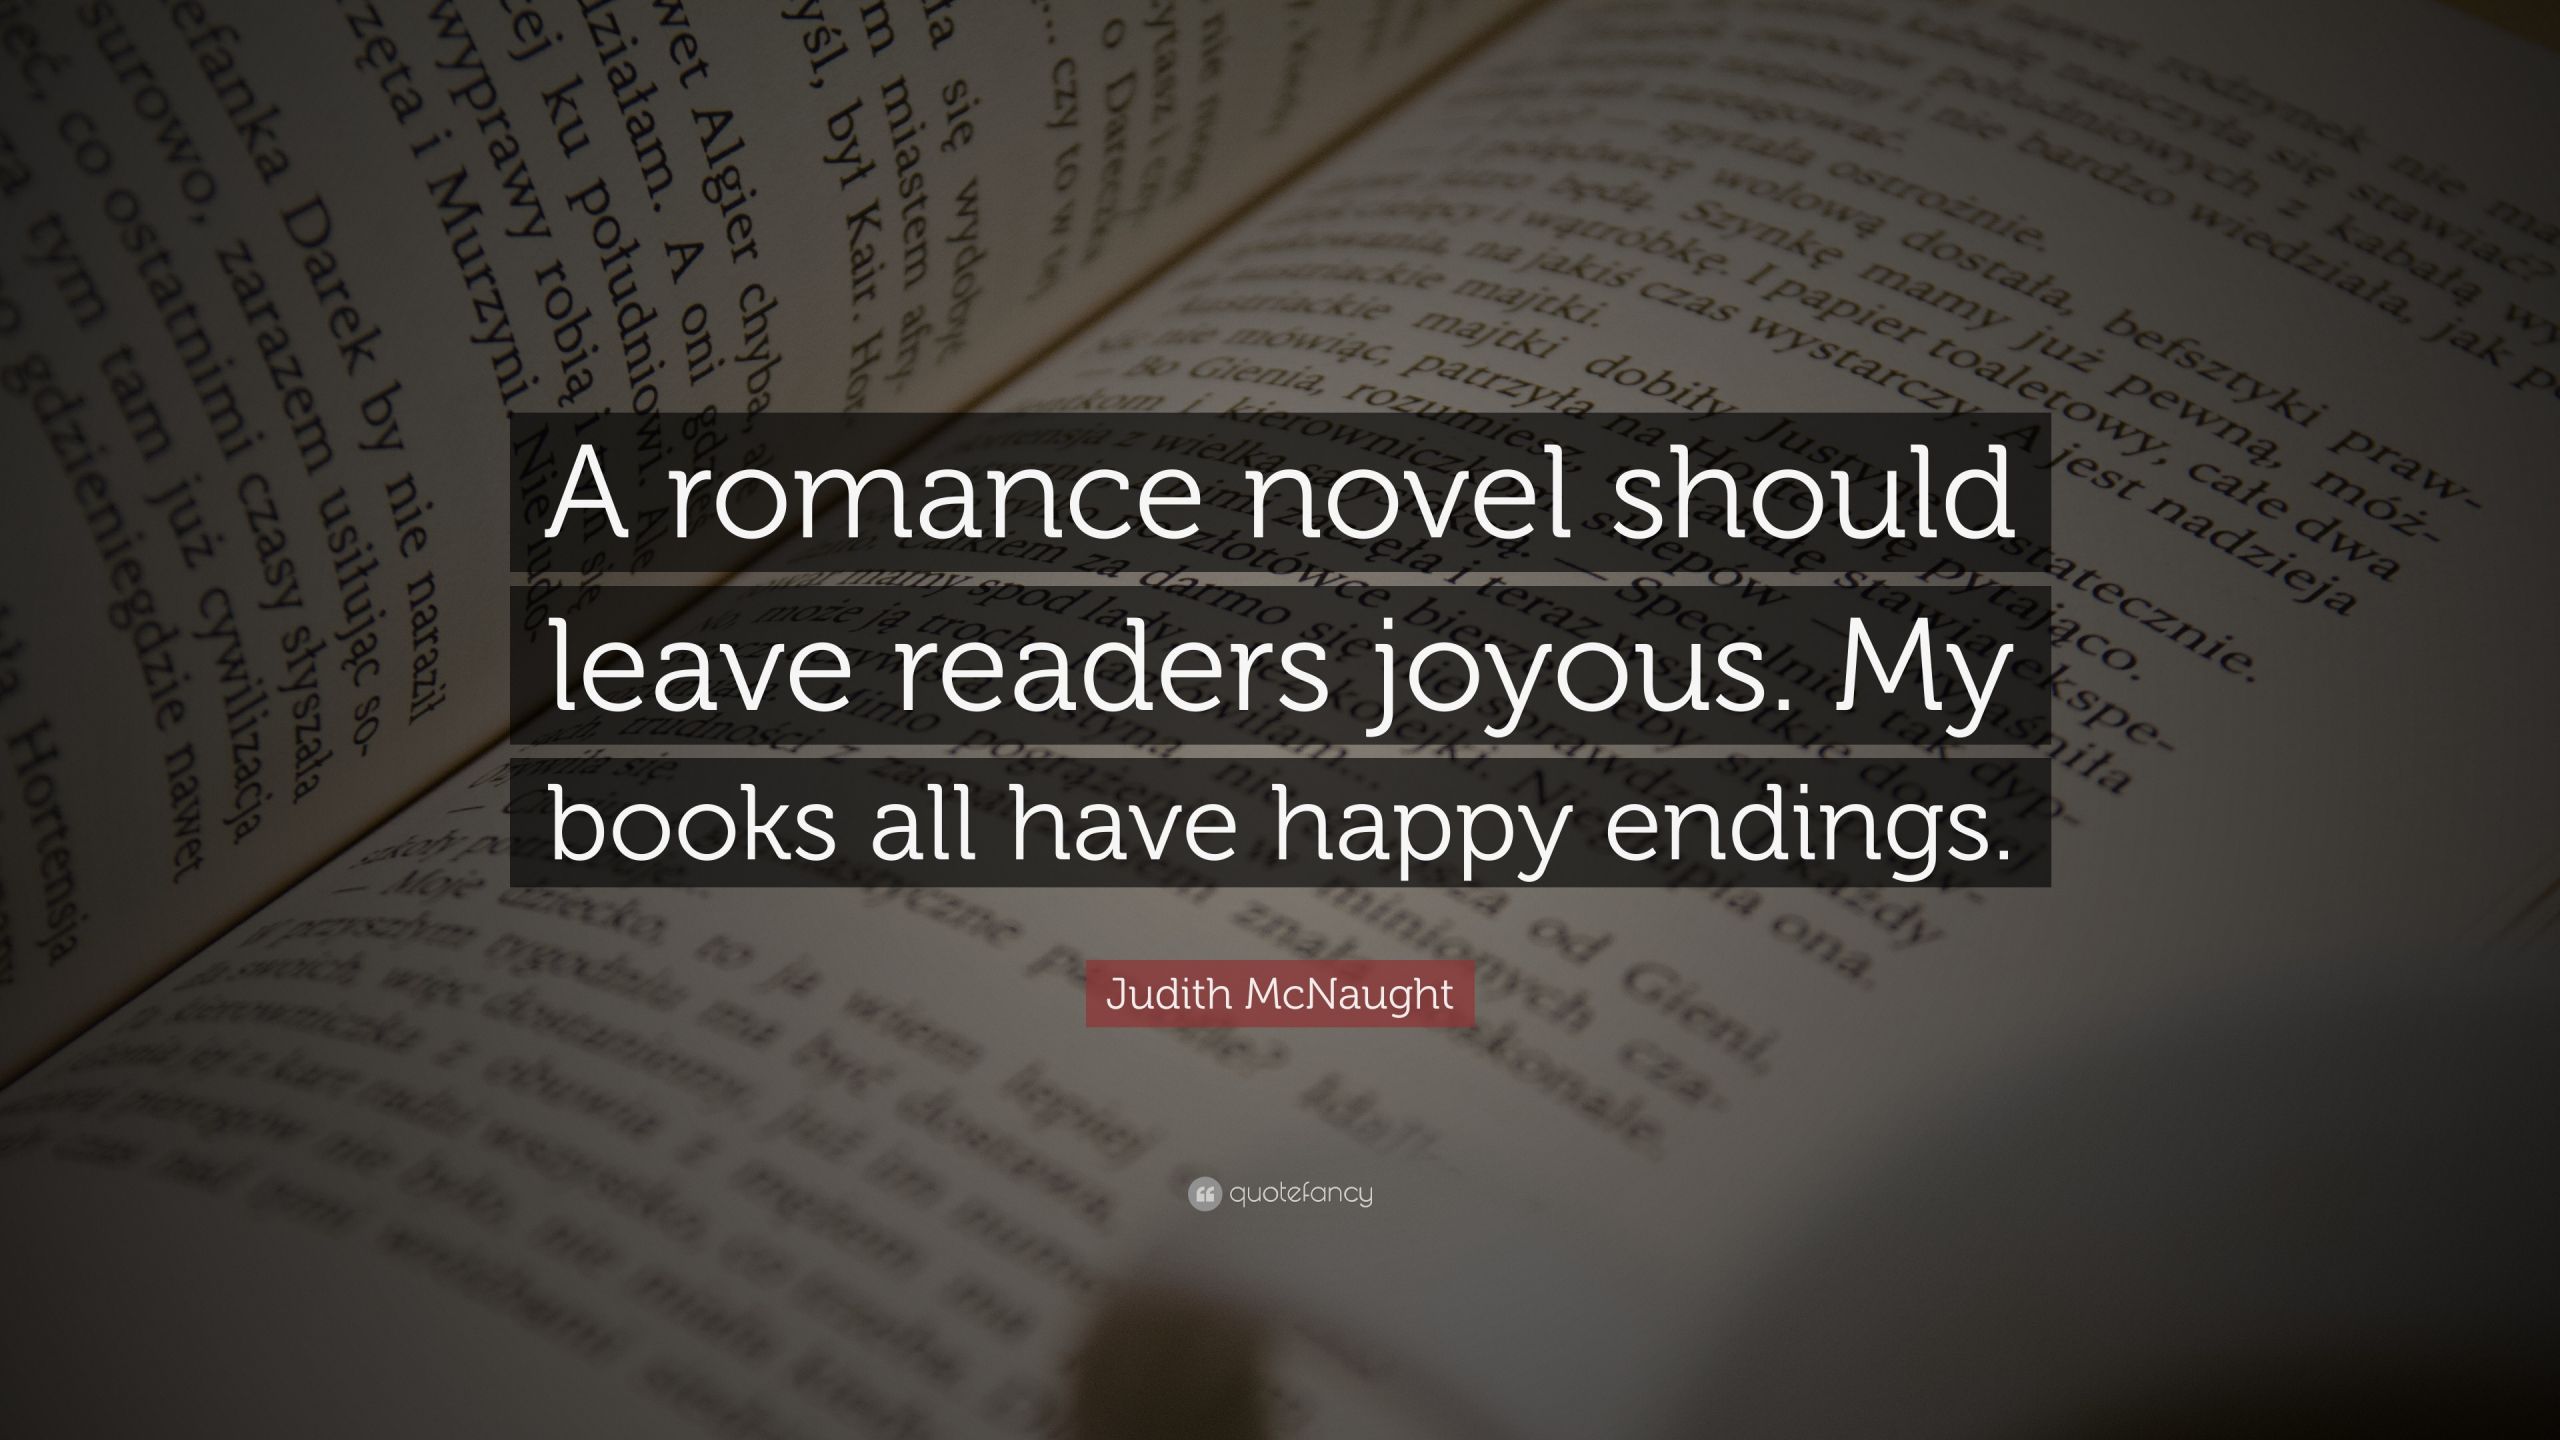 Romantic Book Quotes
 Judith McNaught Quote “A romance novel should leave